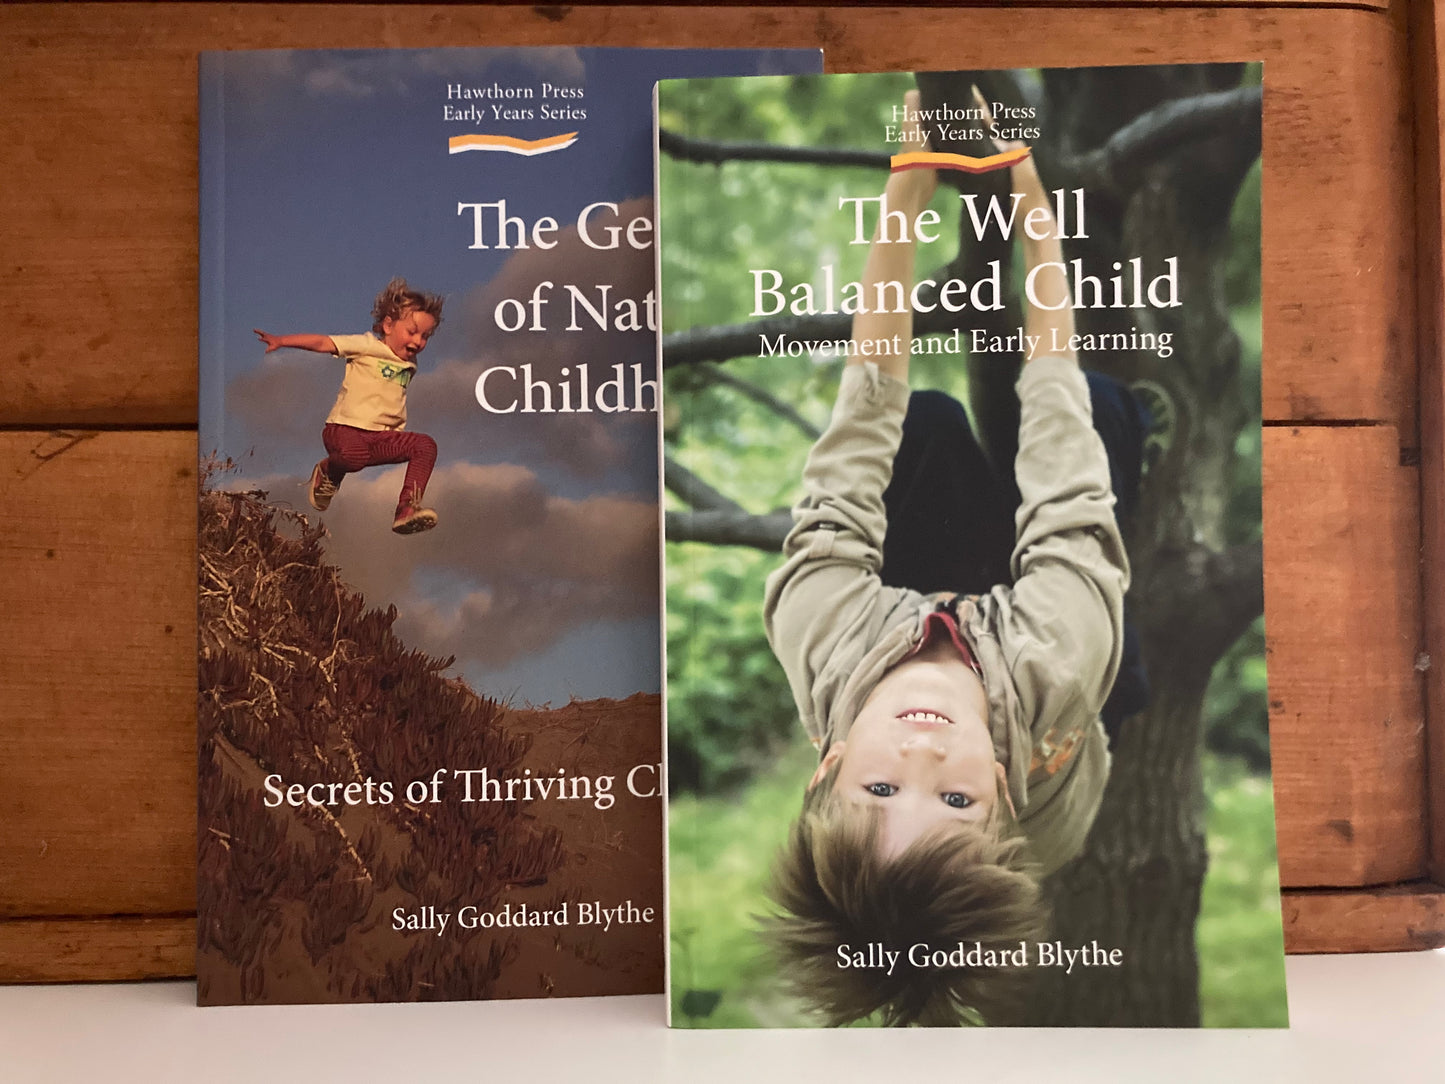 Parenting Resource Book - THE GENIUS OF NATURAL CHILDHOOD